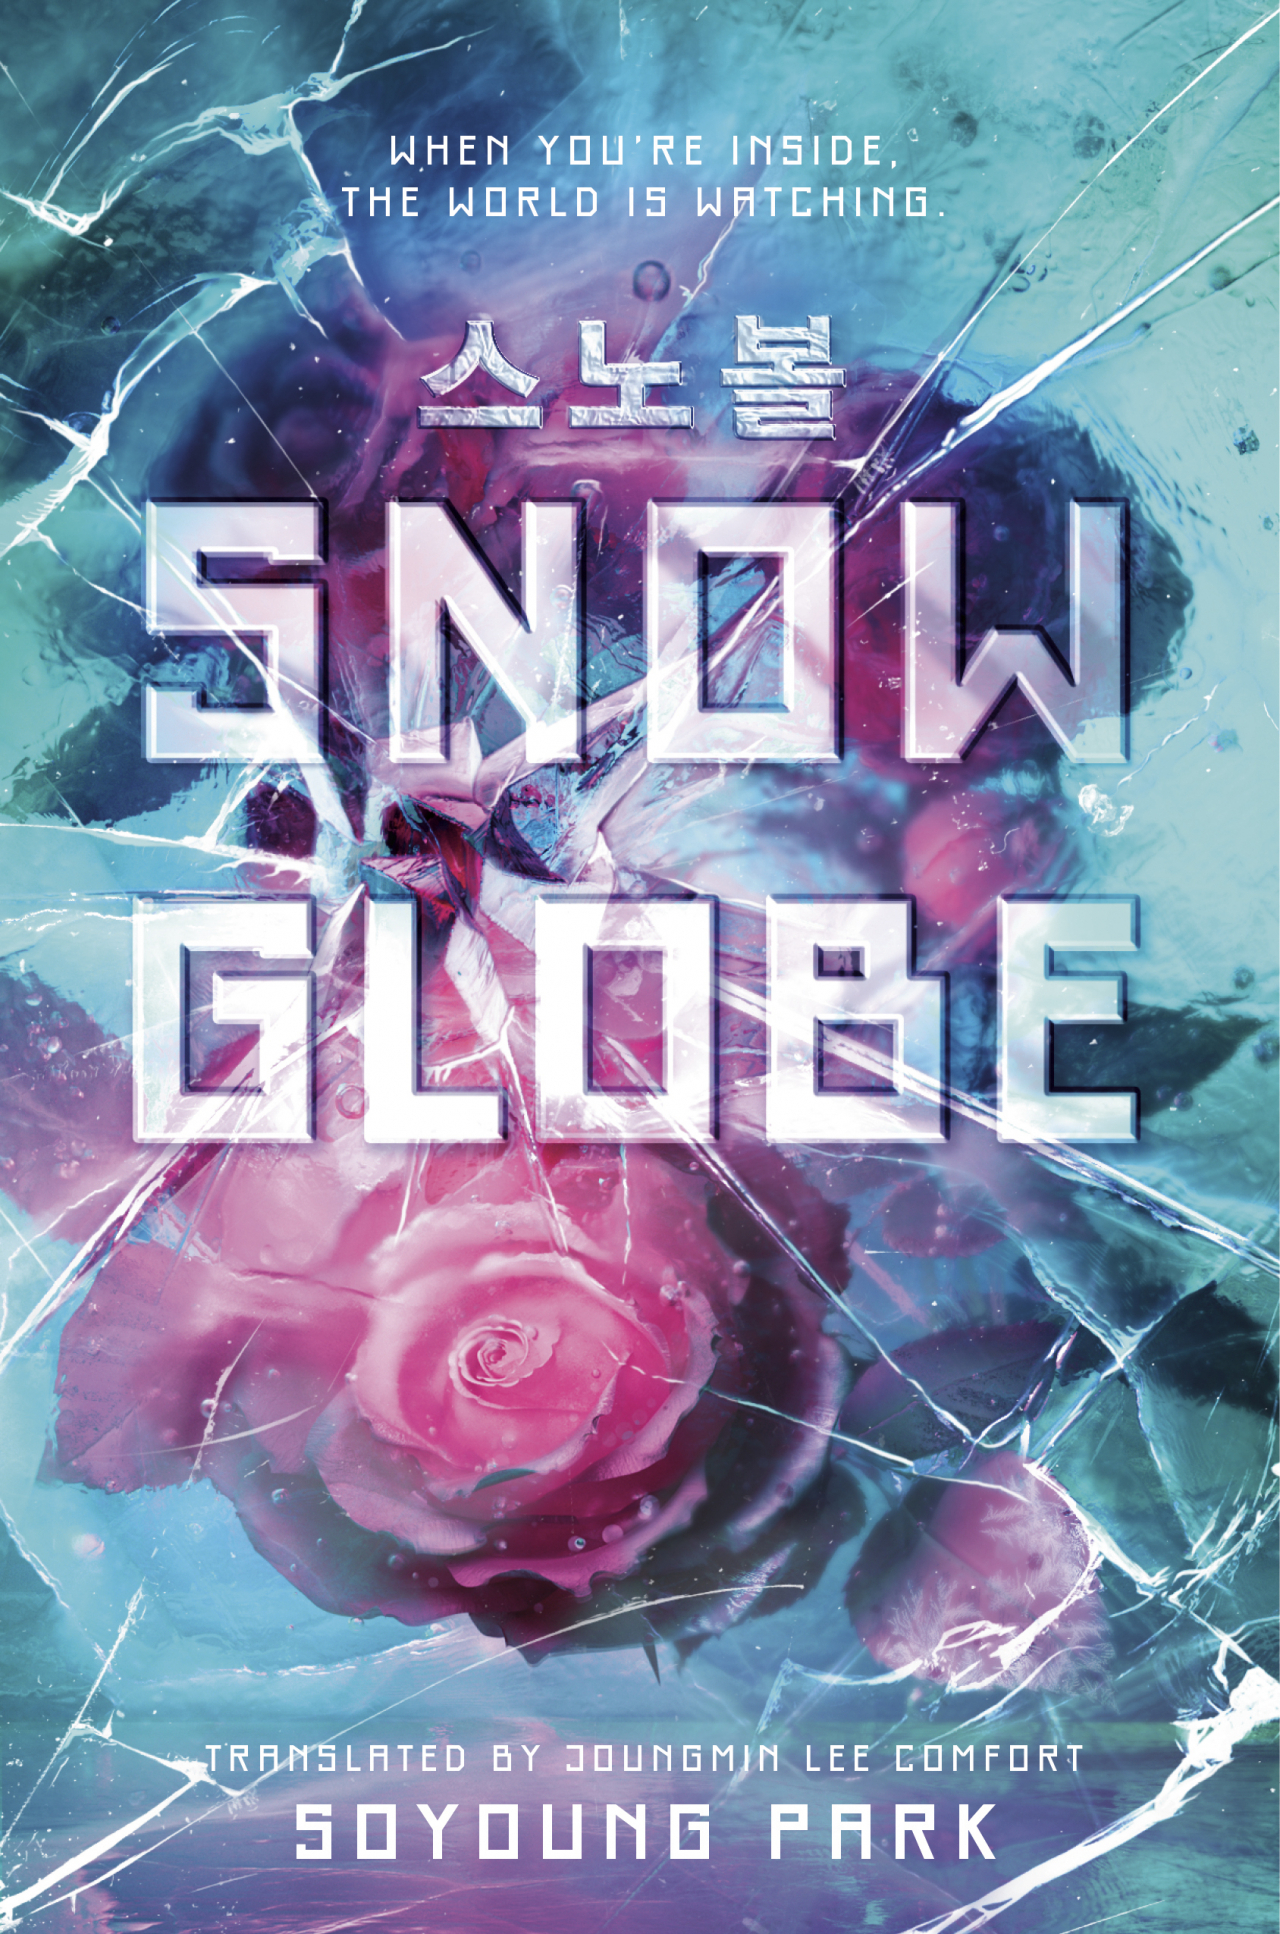 “Snowglobe” by Park So-young (Random House Publishing)